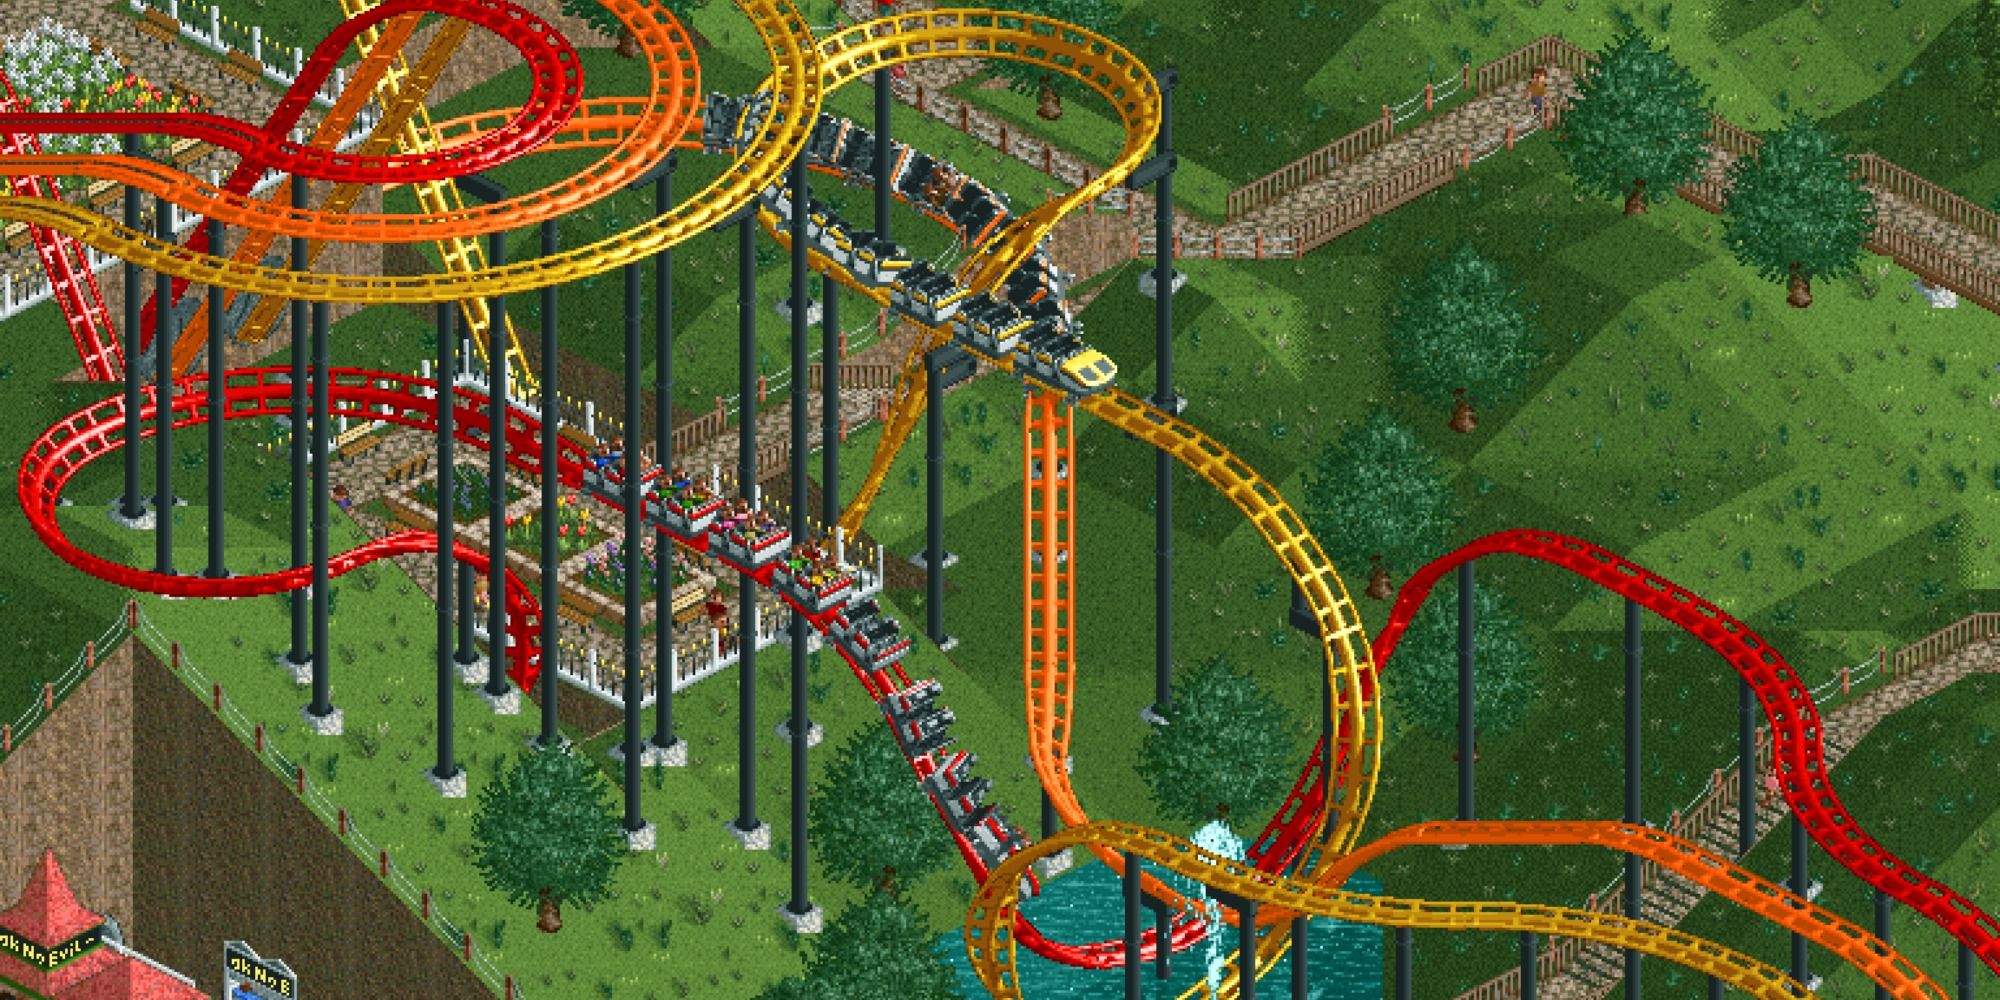 amusement park tycoon where you can ride your rides